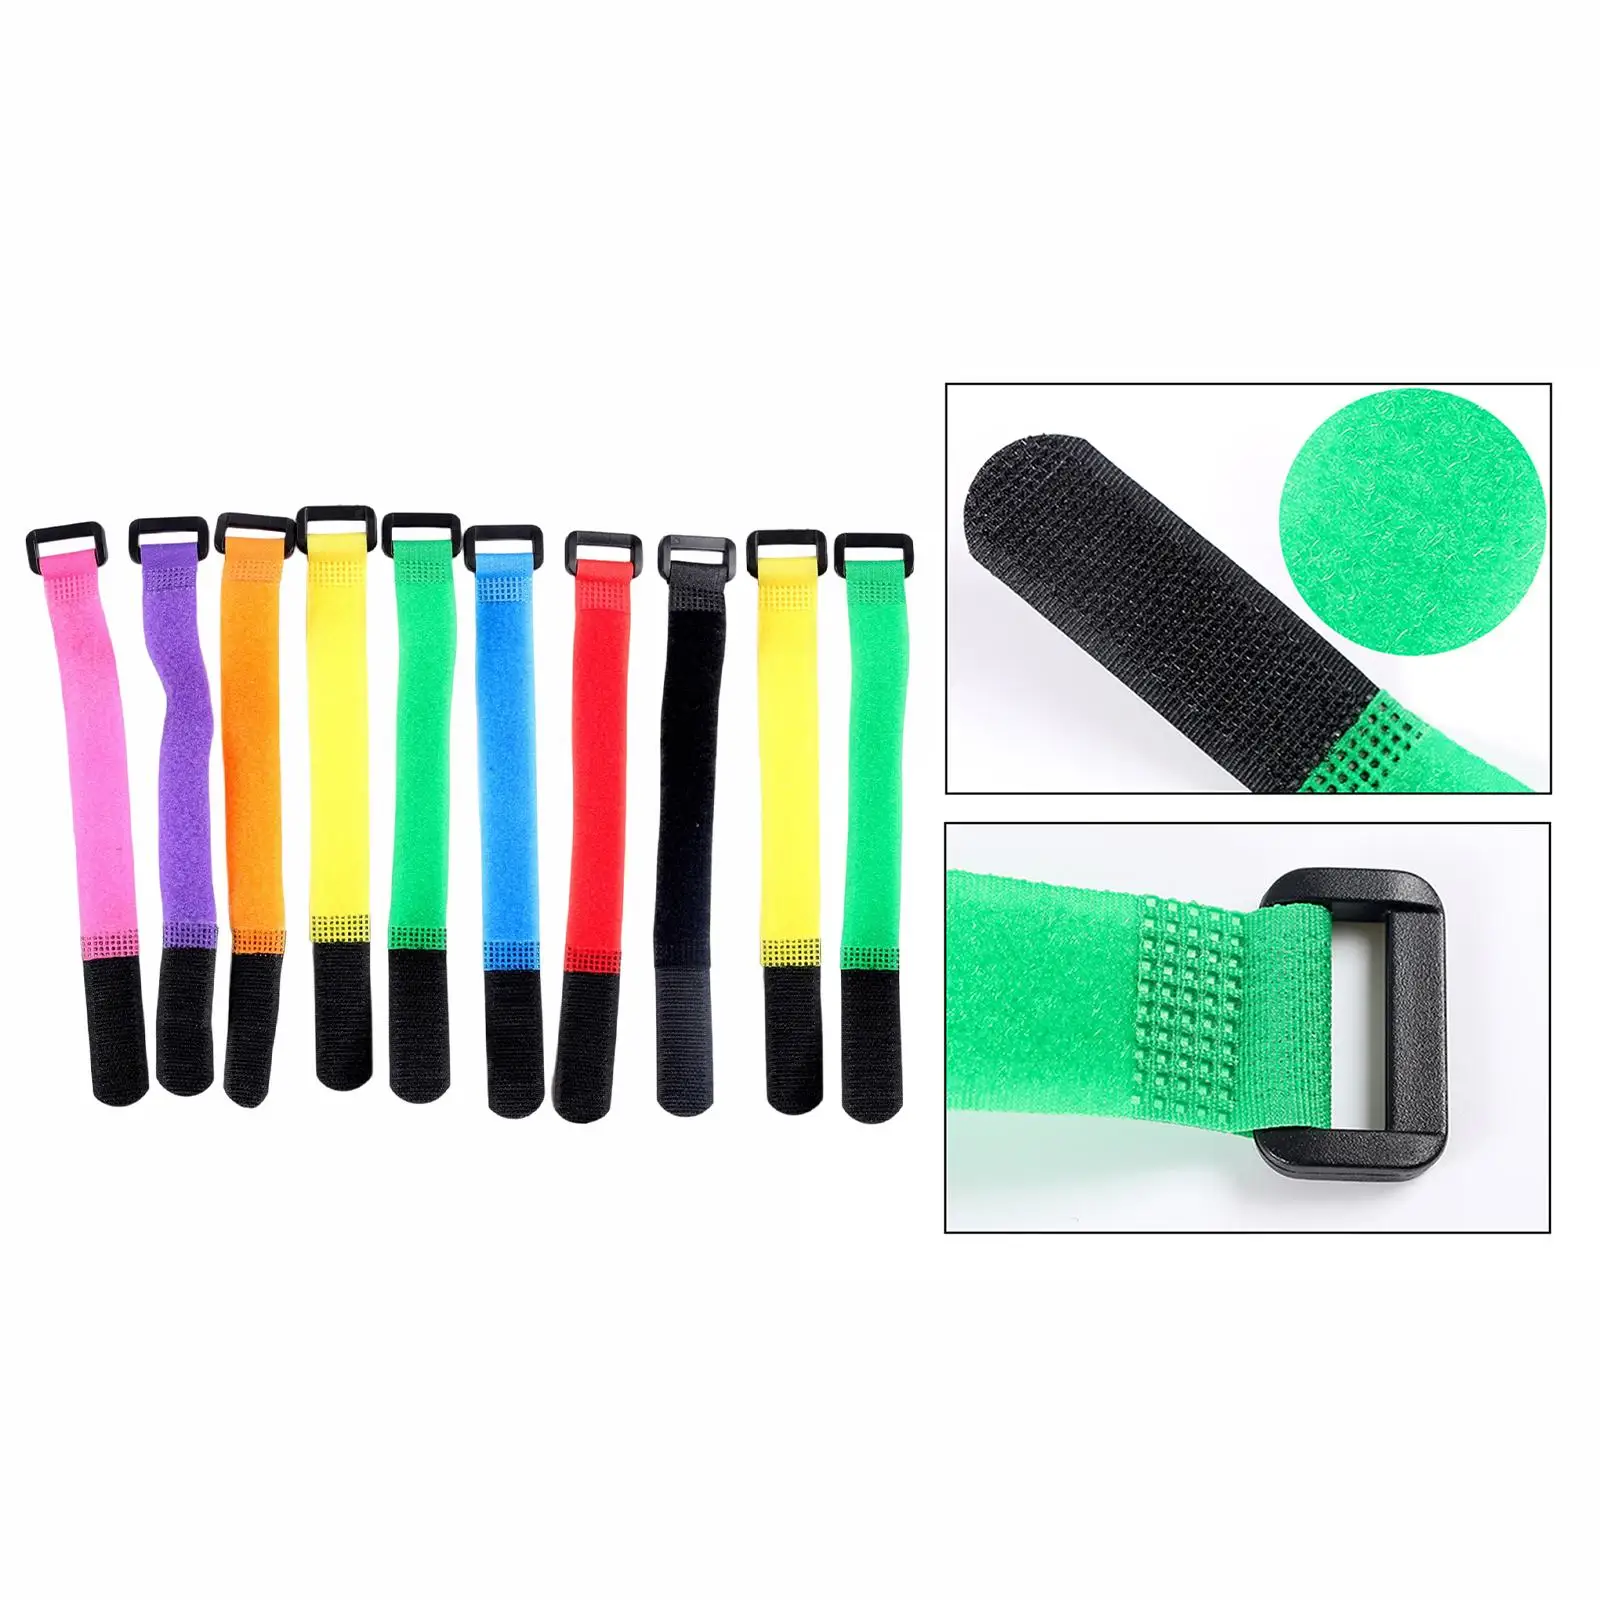 10Pcs Fishing Rod Tie Holders Multicolor Reusable Securing Cord Nylon Wire Ties Hook Fastener for Hoses Pant Garters Bike Office